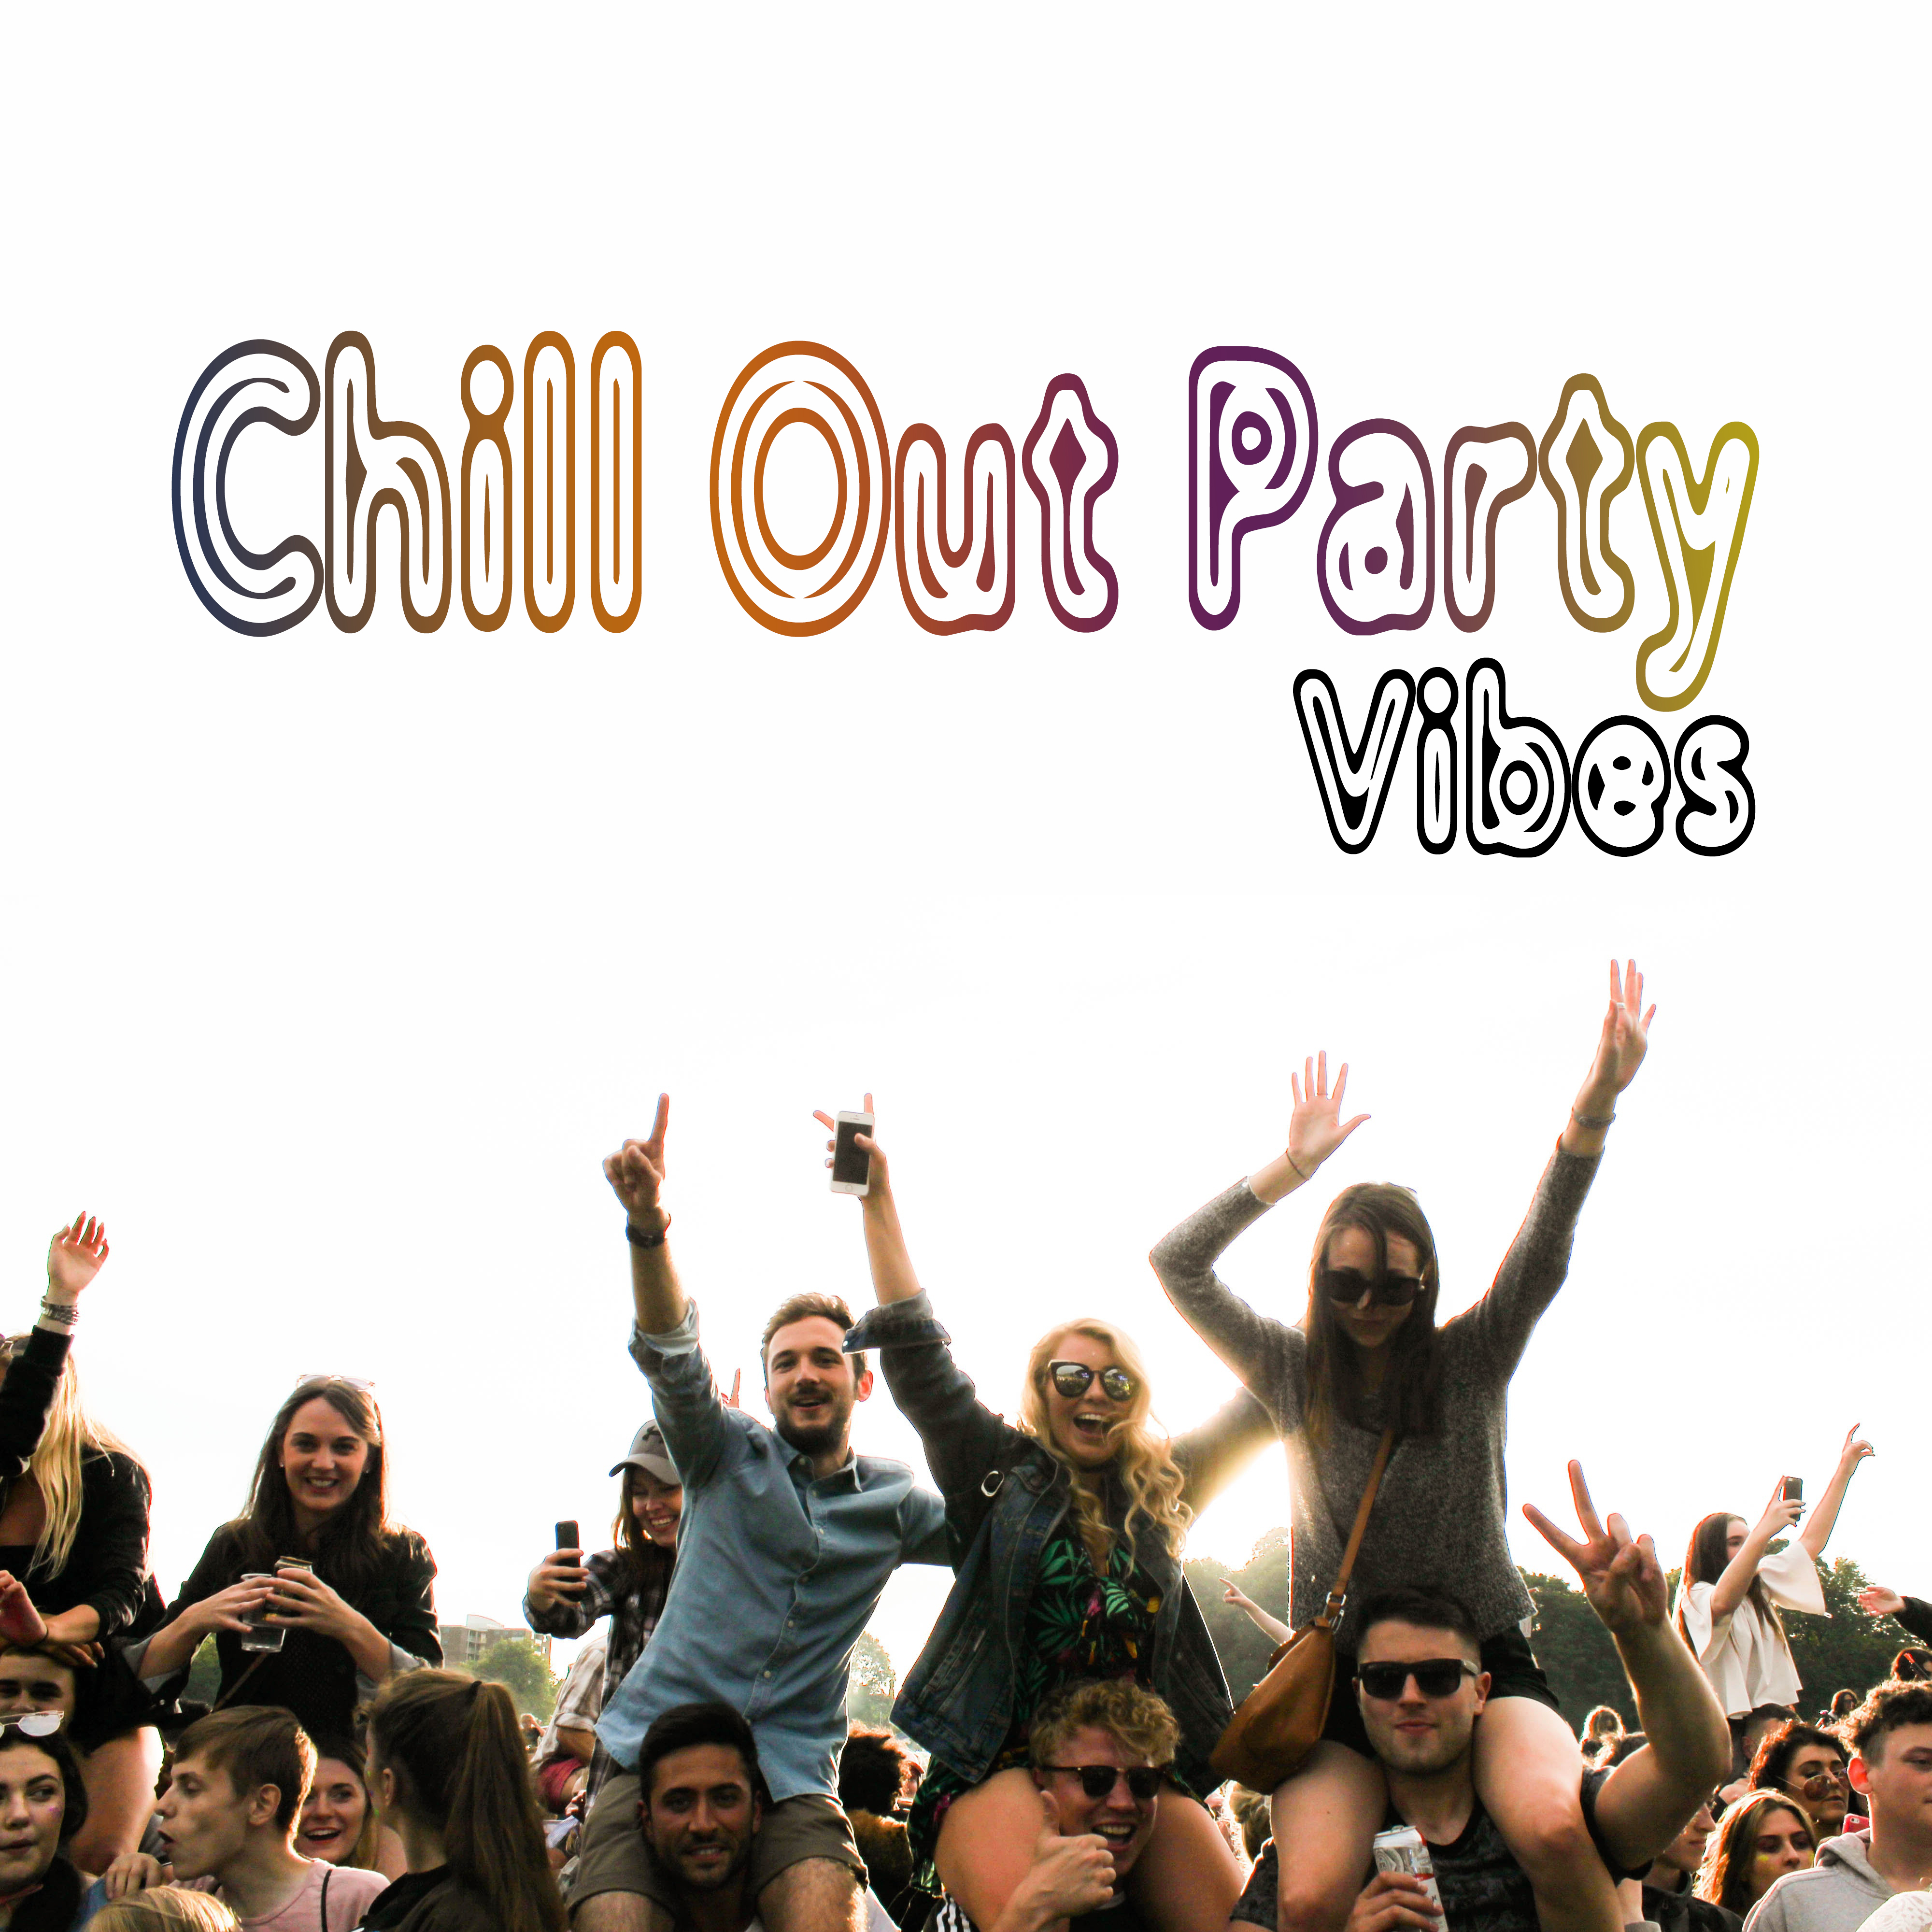 Chill Out Party Vibes - Party Music, Sounds to Have Fun, Chill Out Ibiza Vibes, Party All Night